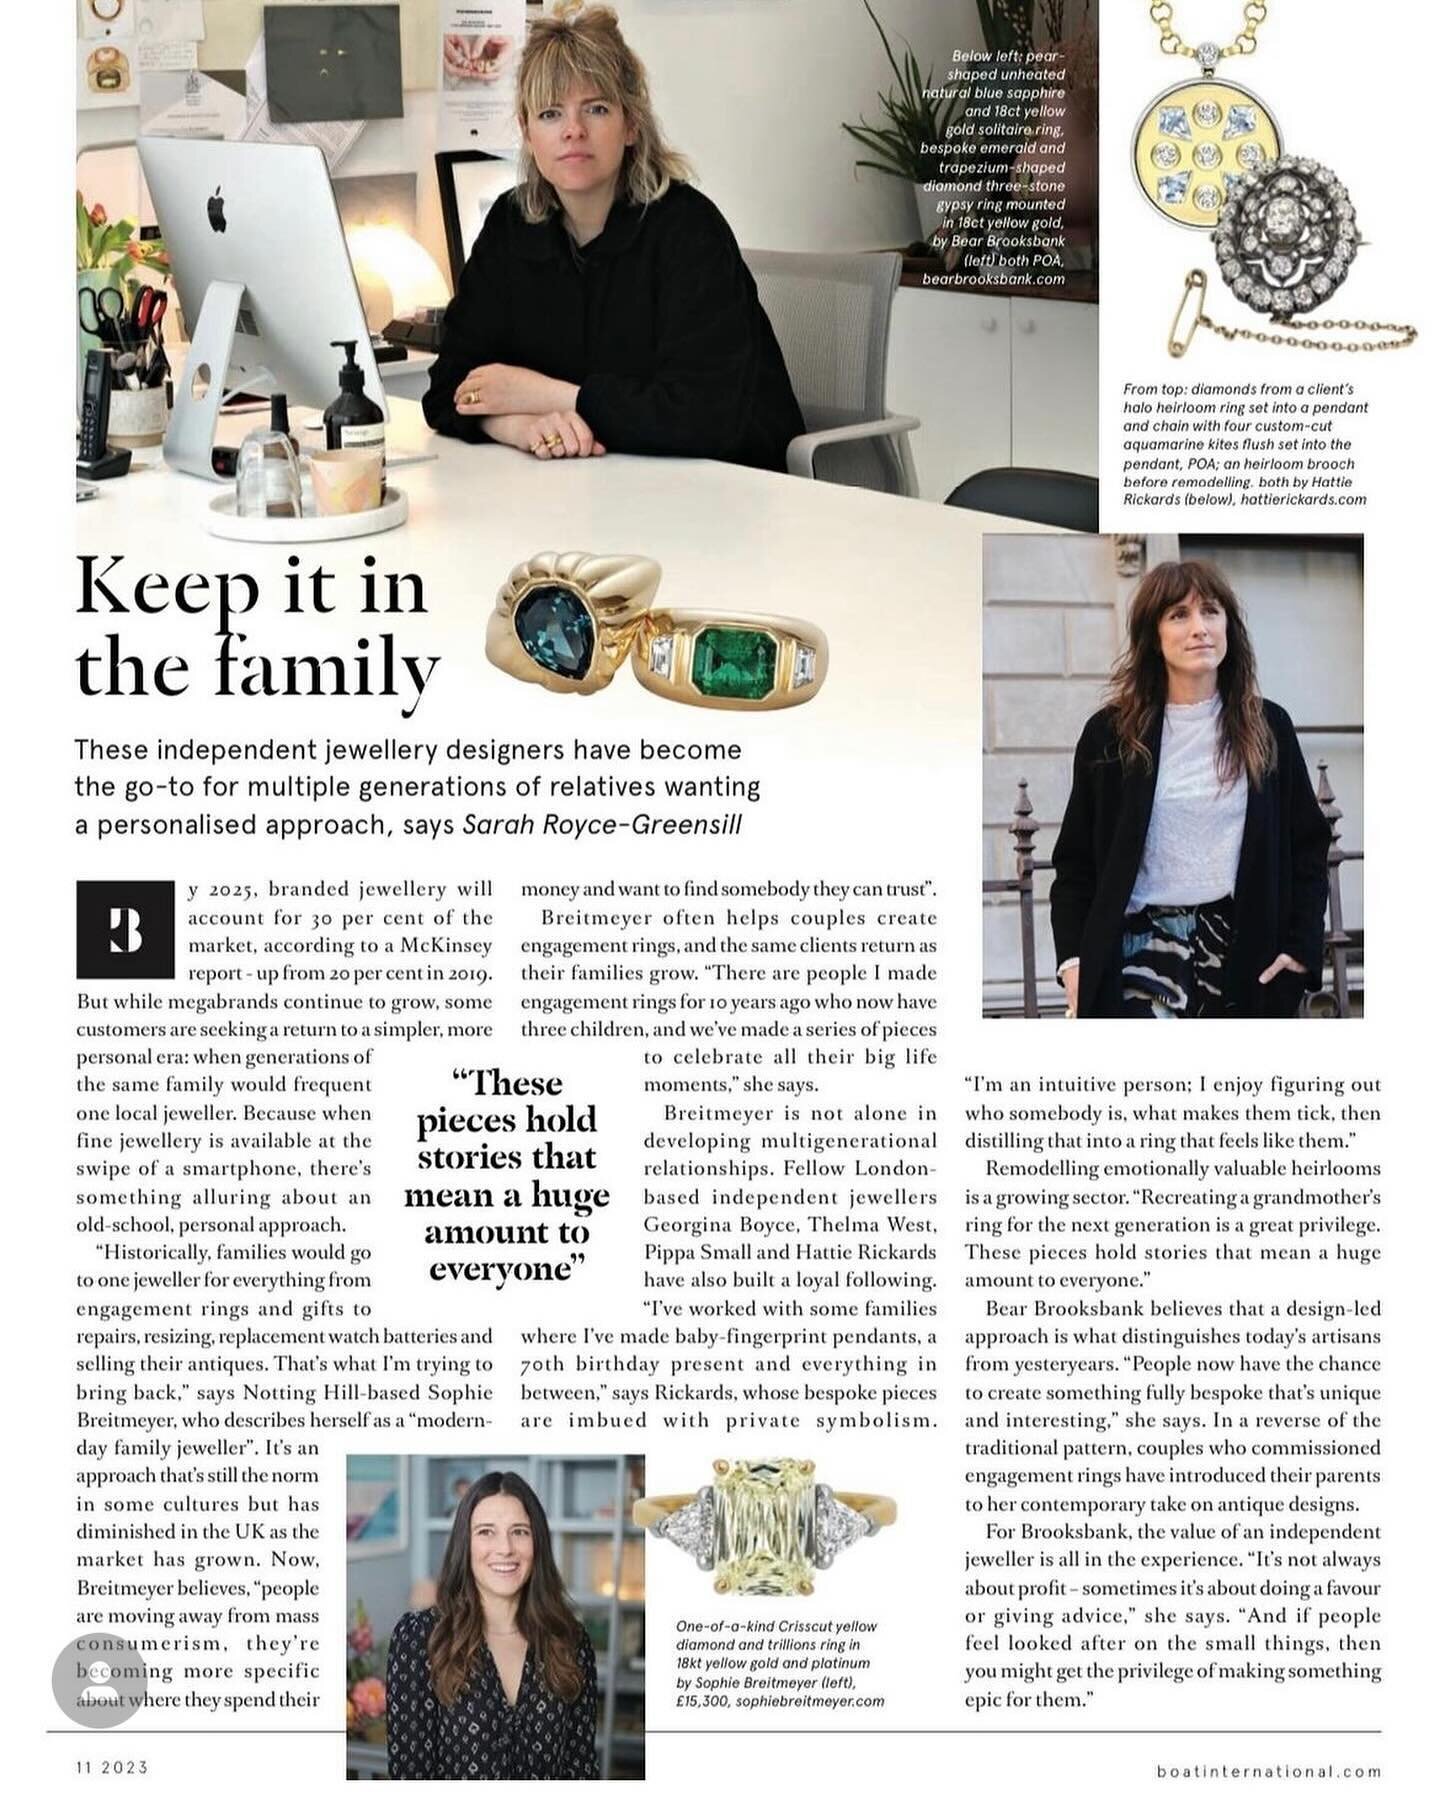 Just a wee little mention for us in @boatinternational for our loyal bespoke following.  Toot toot!  Thank you to the glorious @srgjewel xx #editorial #boatinternational #sarahroycegreensill #gbfj